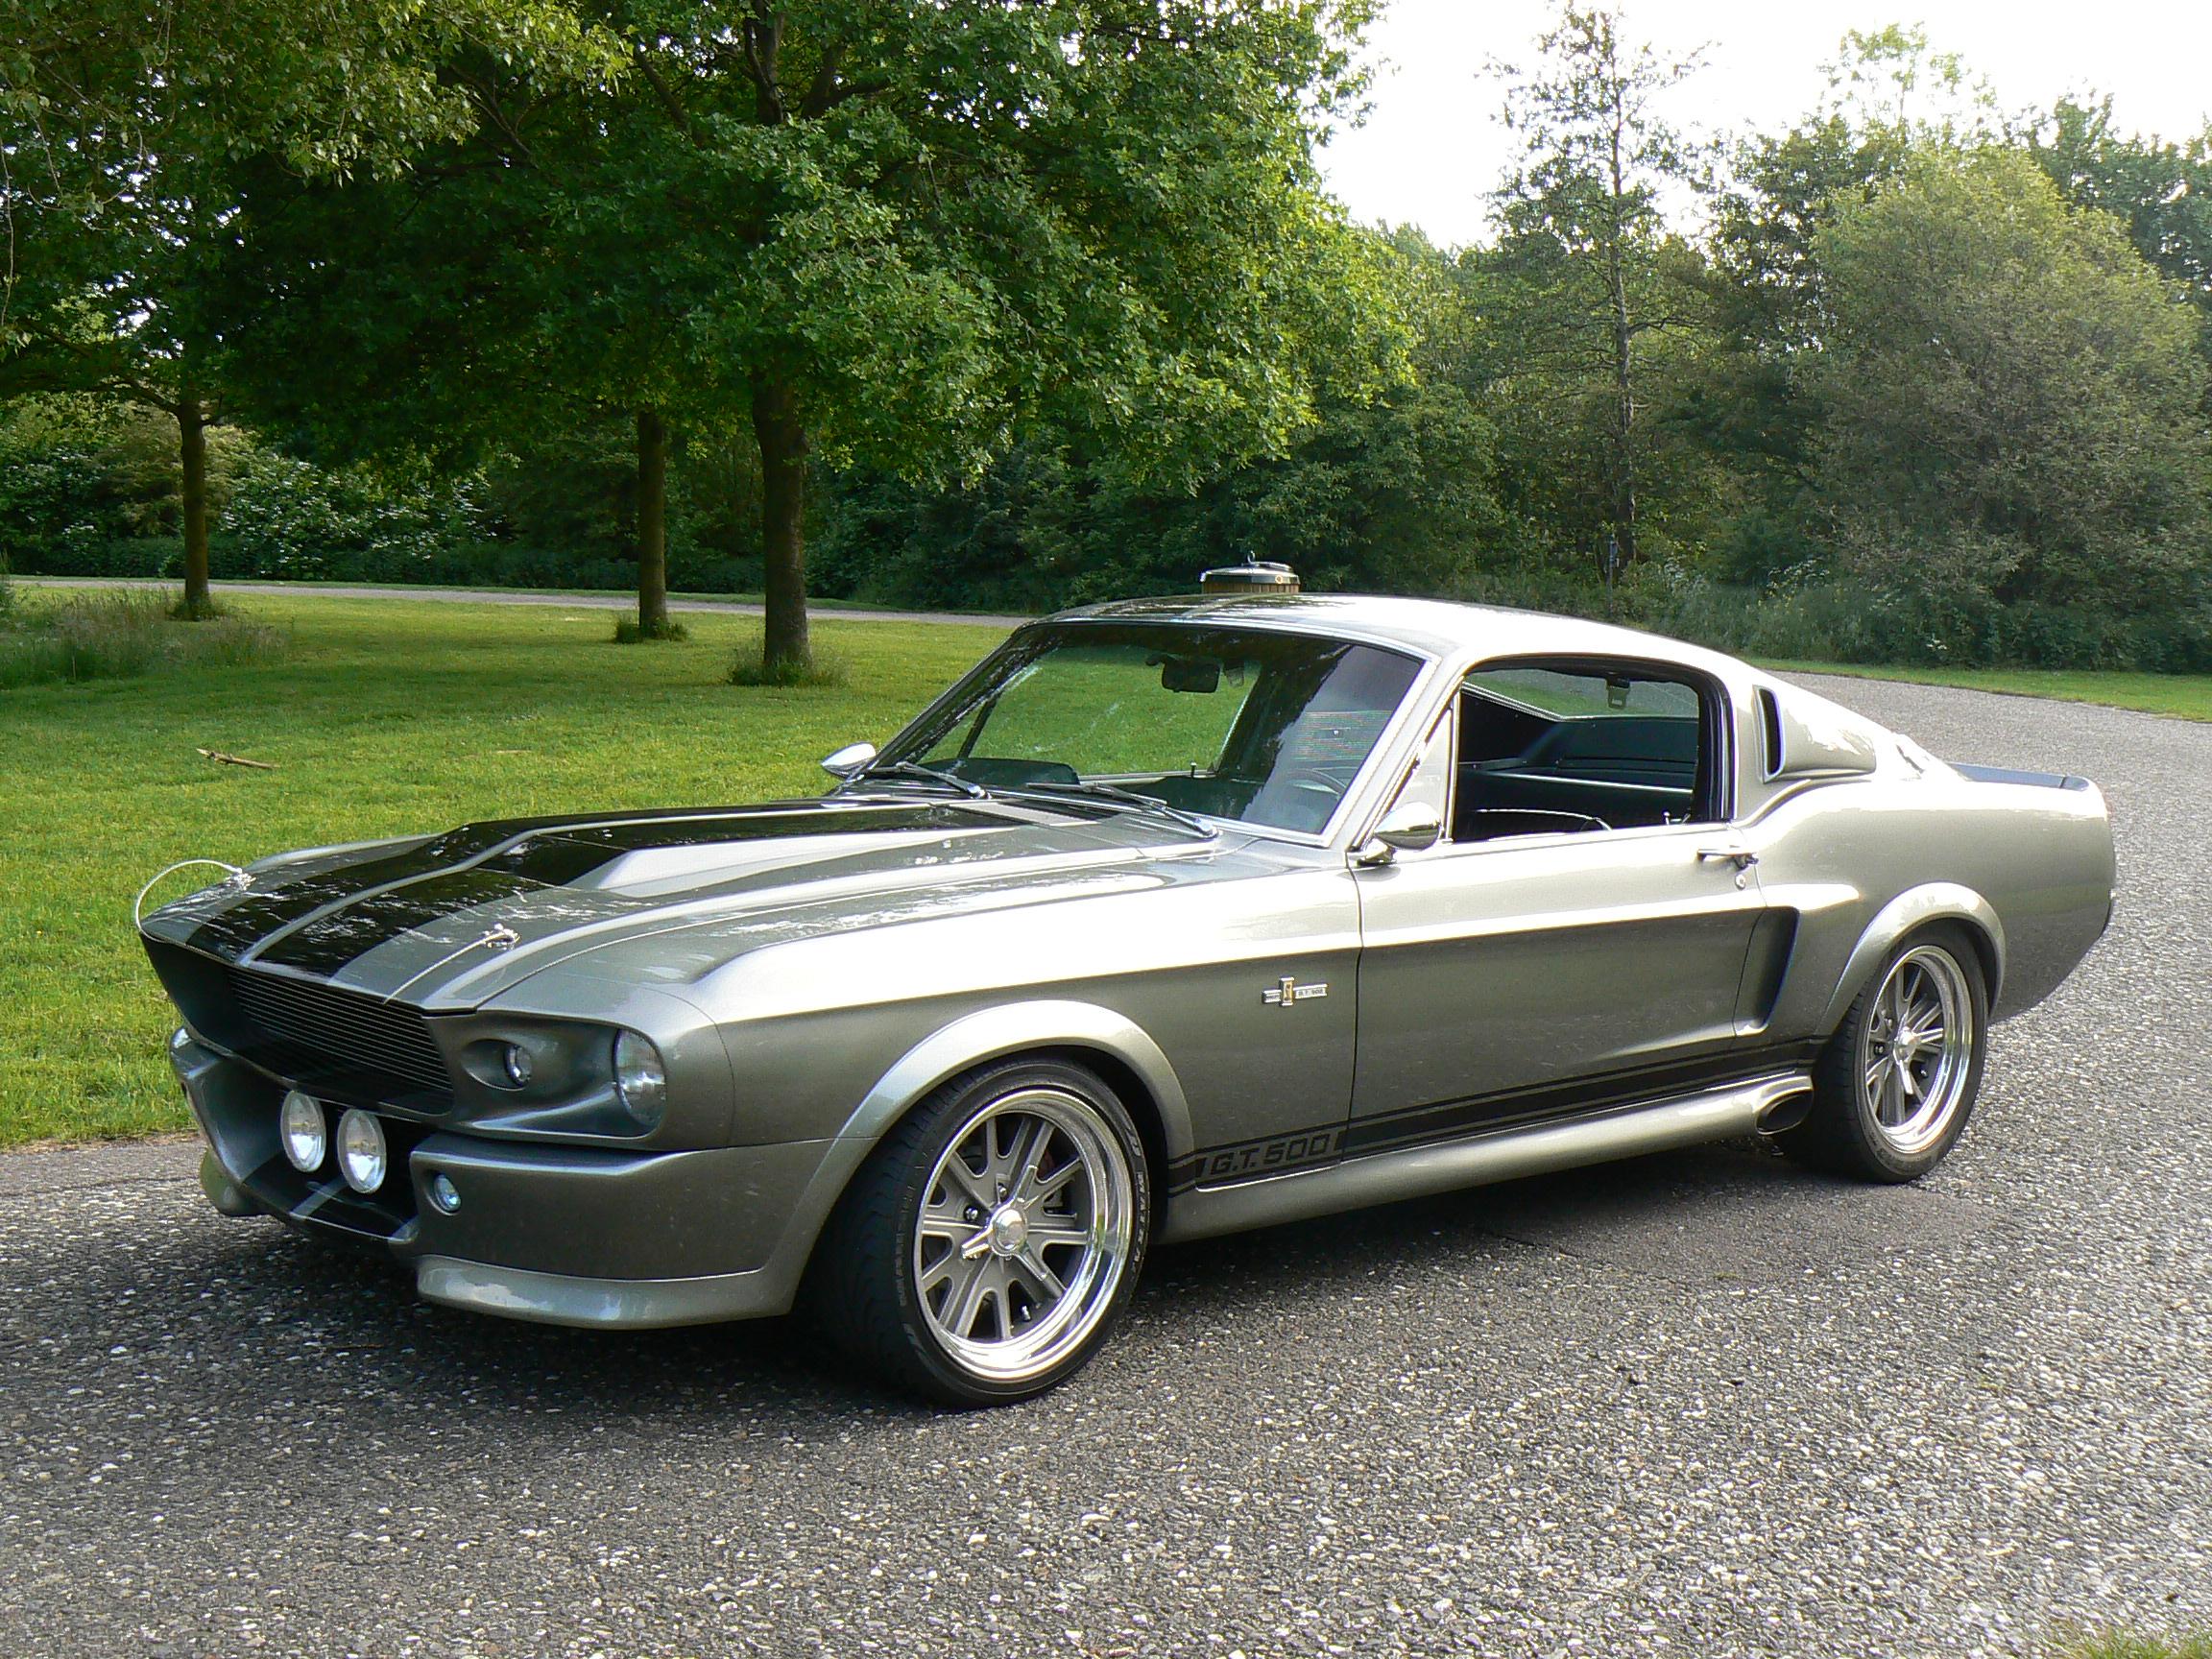 Ford Mustang 1967 Shelby Gt500 For Sale